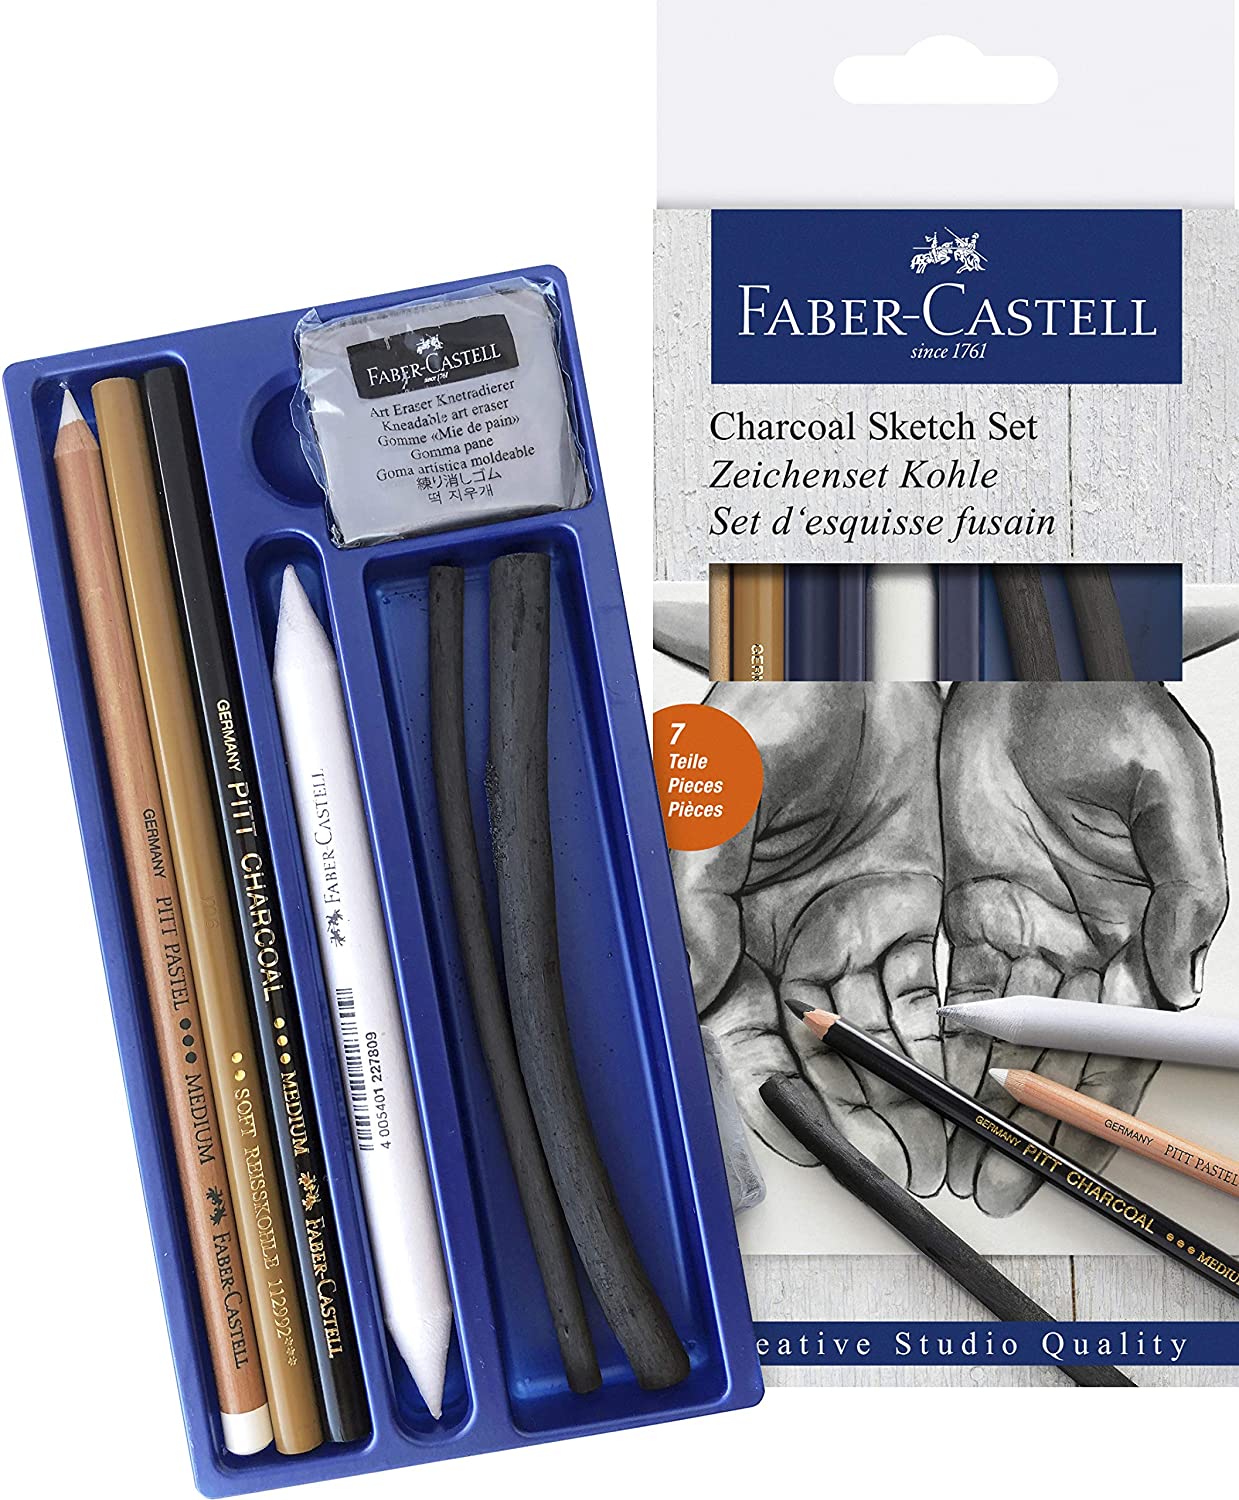 Charcoal Sketch Set Faber Castell Crafty Arts